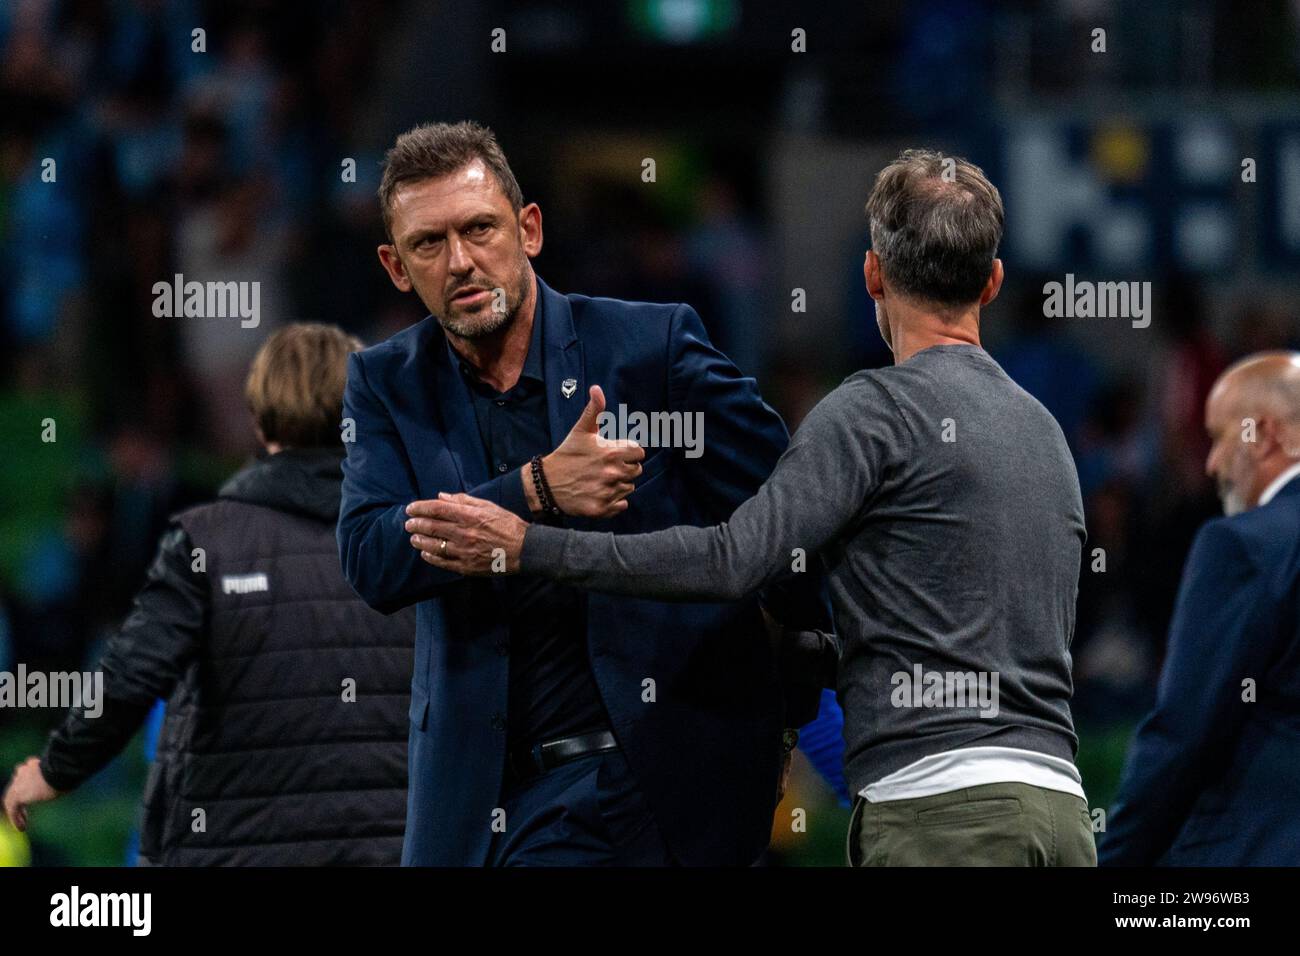 Melbourne, Australia. 23 December, 2023. Melbourne Victory FC Head Coach Tony Popovic gives the thumbs up to his opposing team at the conclusion of the Isuzu UTE A-League match between Melbourne City FC and Melbourne Victory FC at AAMI Park in Melbourne, Australia. Credit: James Forrester/Alamy Live News Stock Photo